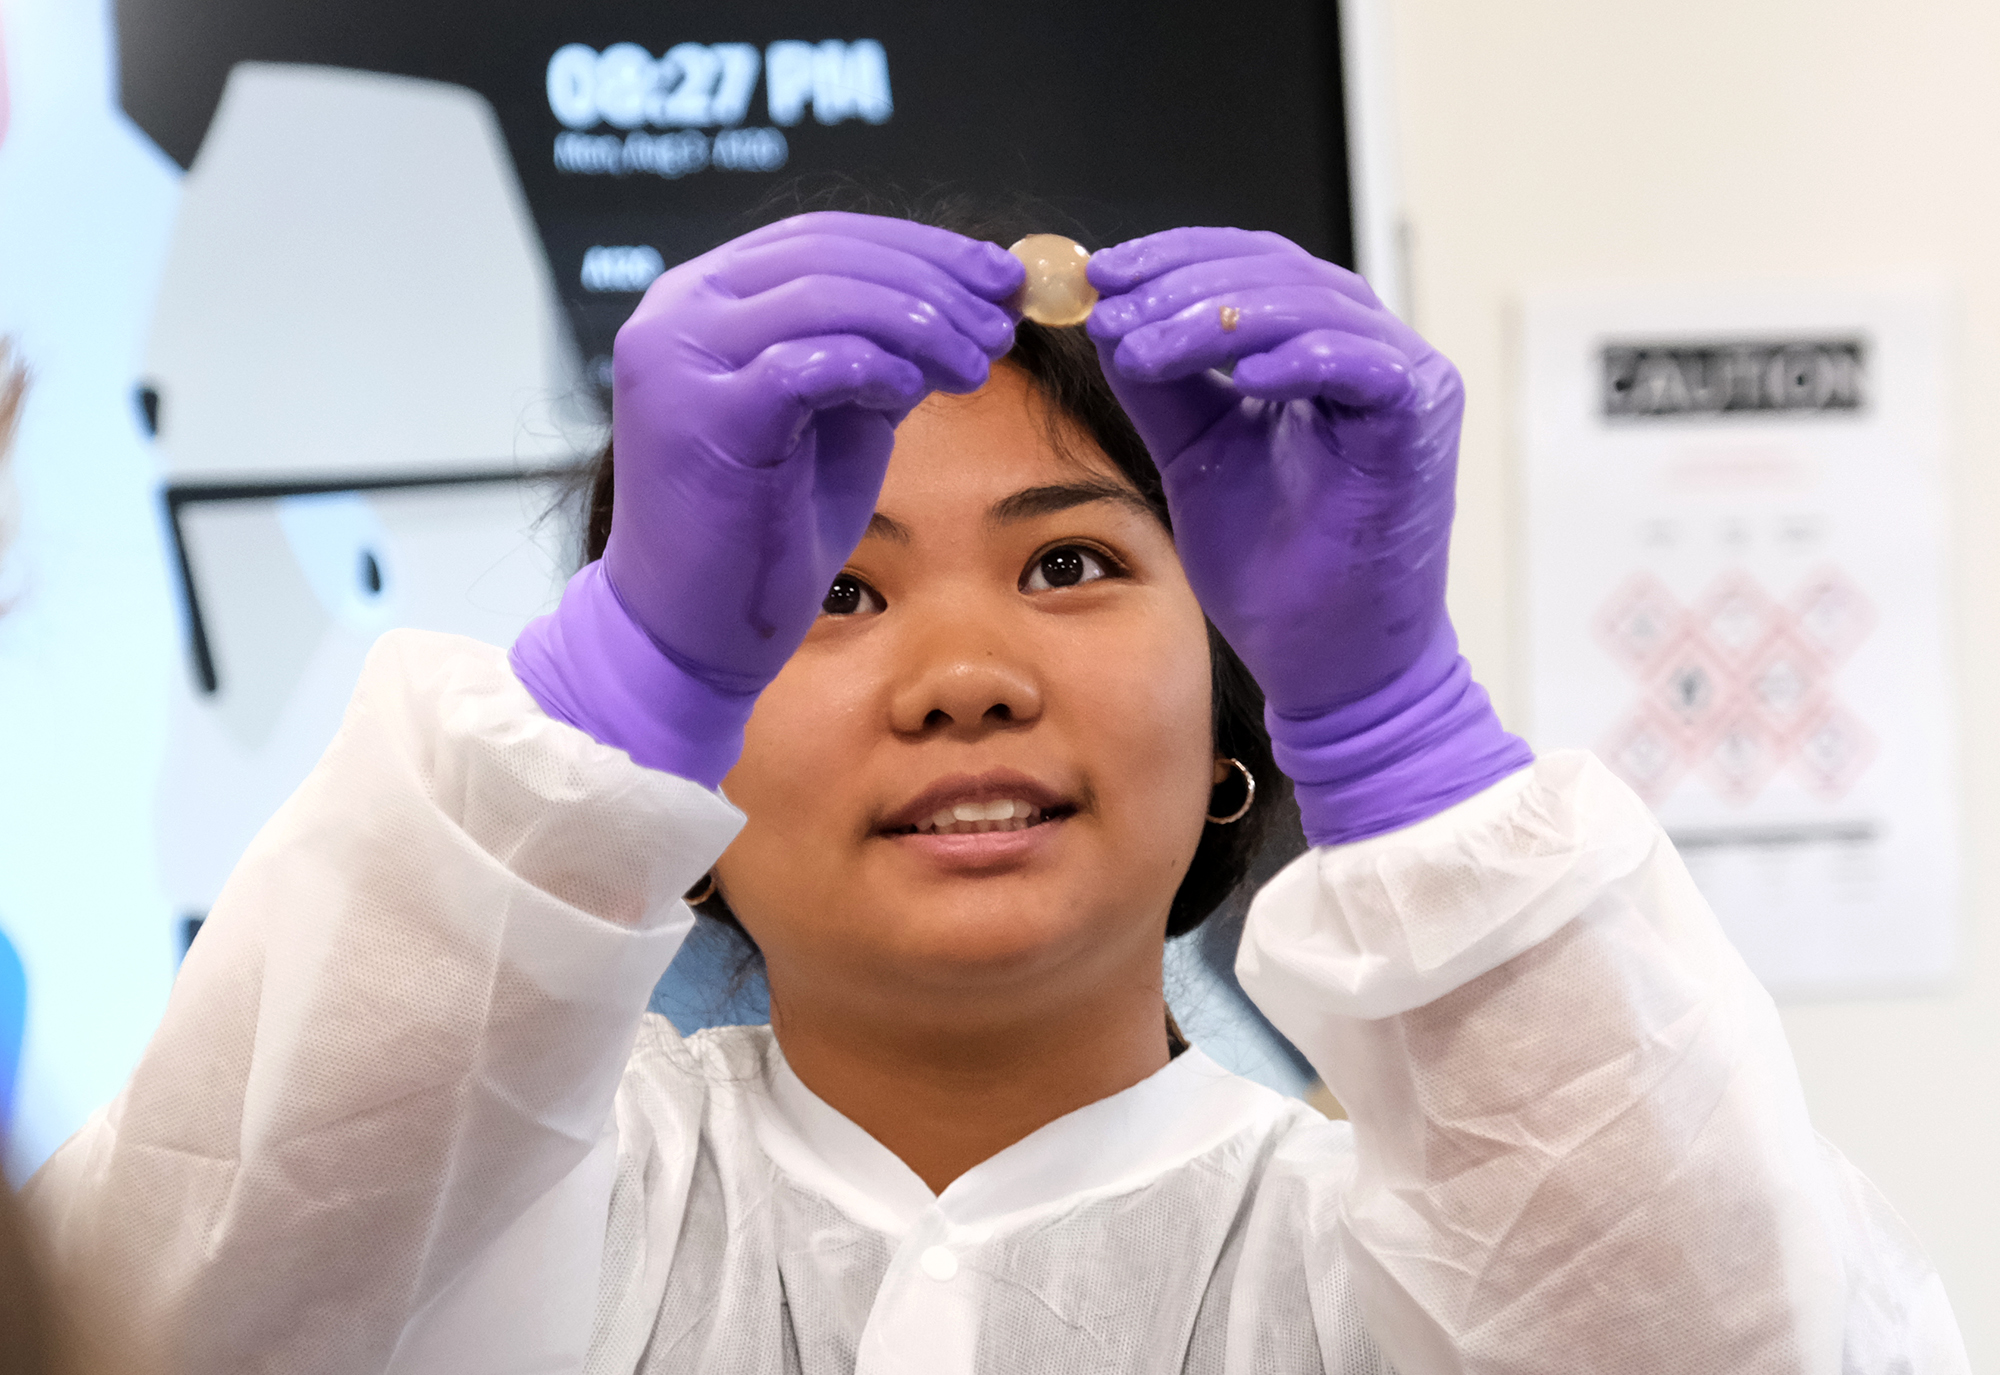 A Health Sciences student wearing white personal protective equipment and purple latex gloves inspecting the lens of a cow's eye.